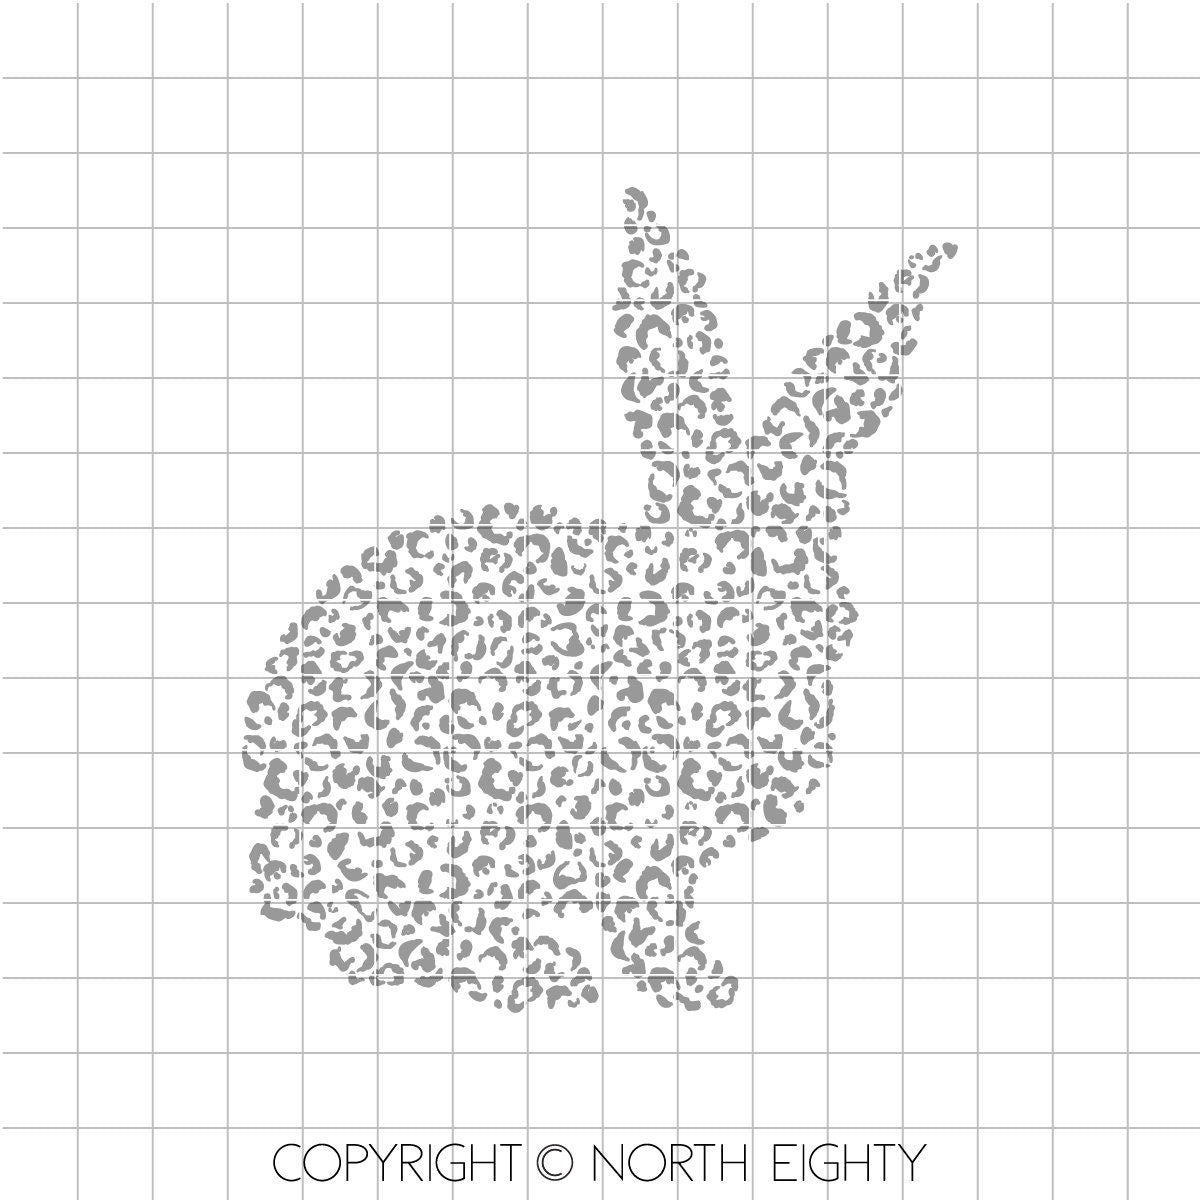 Easter svg - Leopard Bunny cut file - Easter dxf - Leopard Cut File - Silhouette dxf - cut files for silhouette - cheetah - Leopard